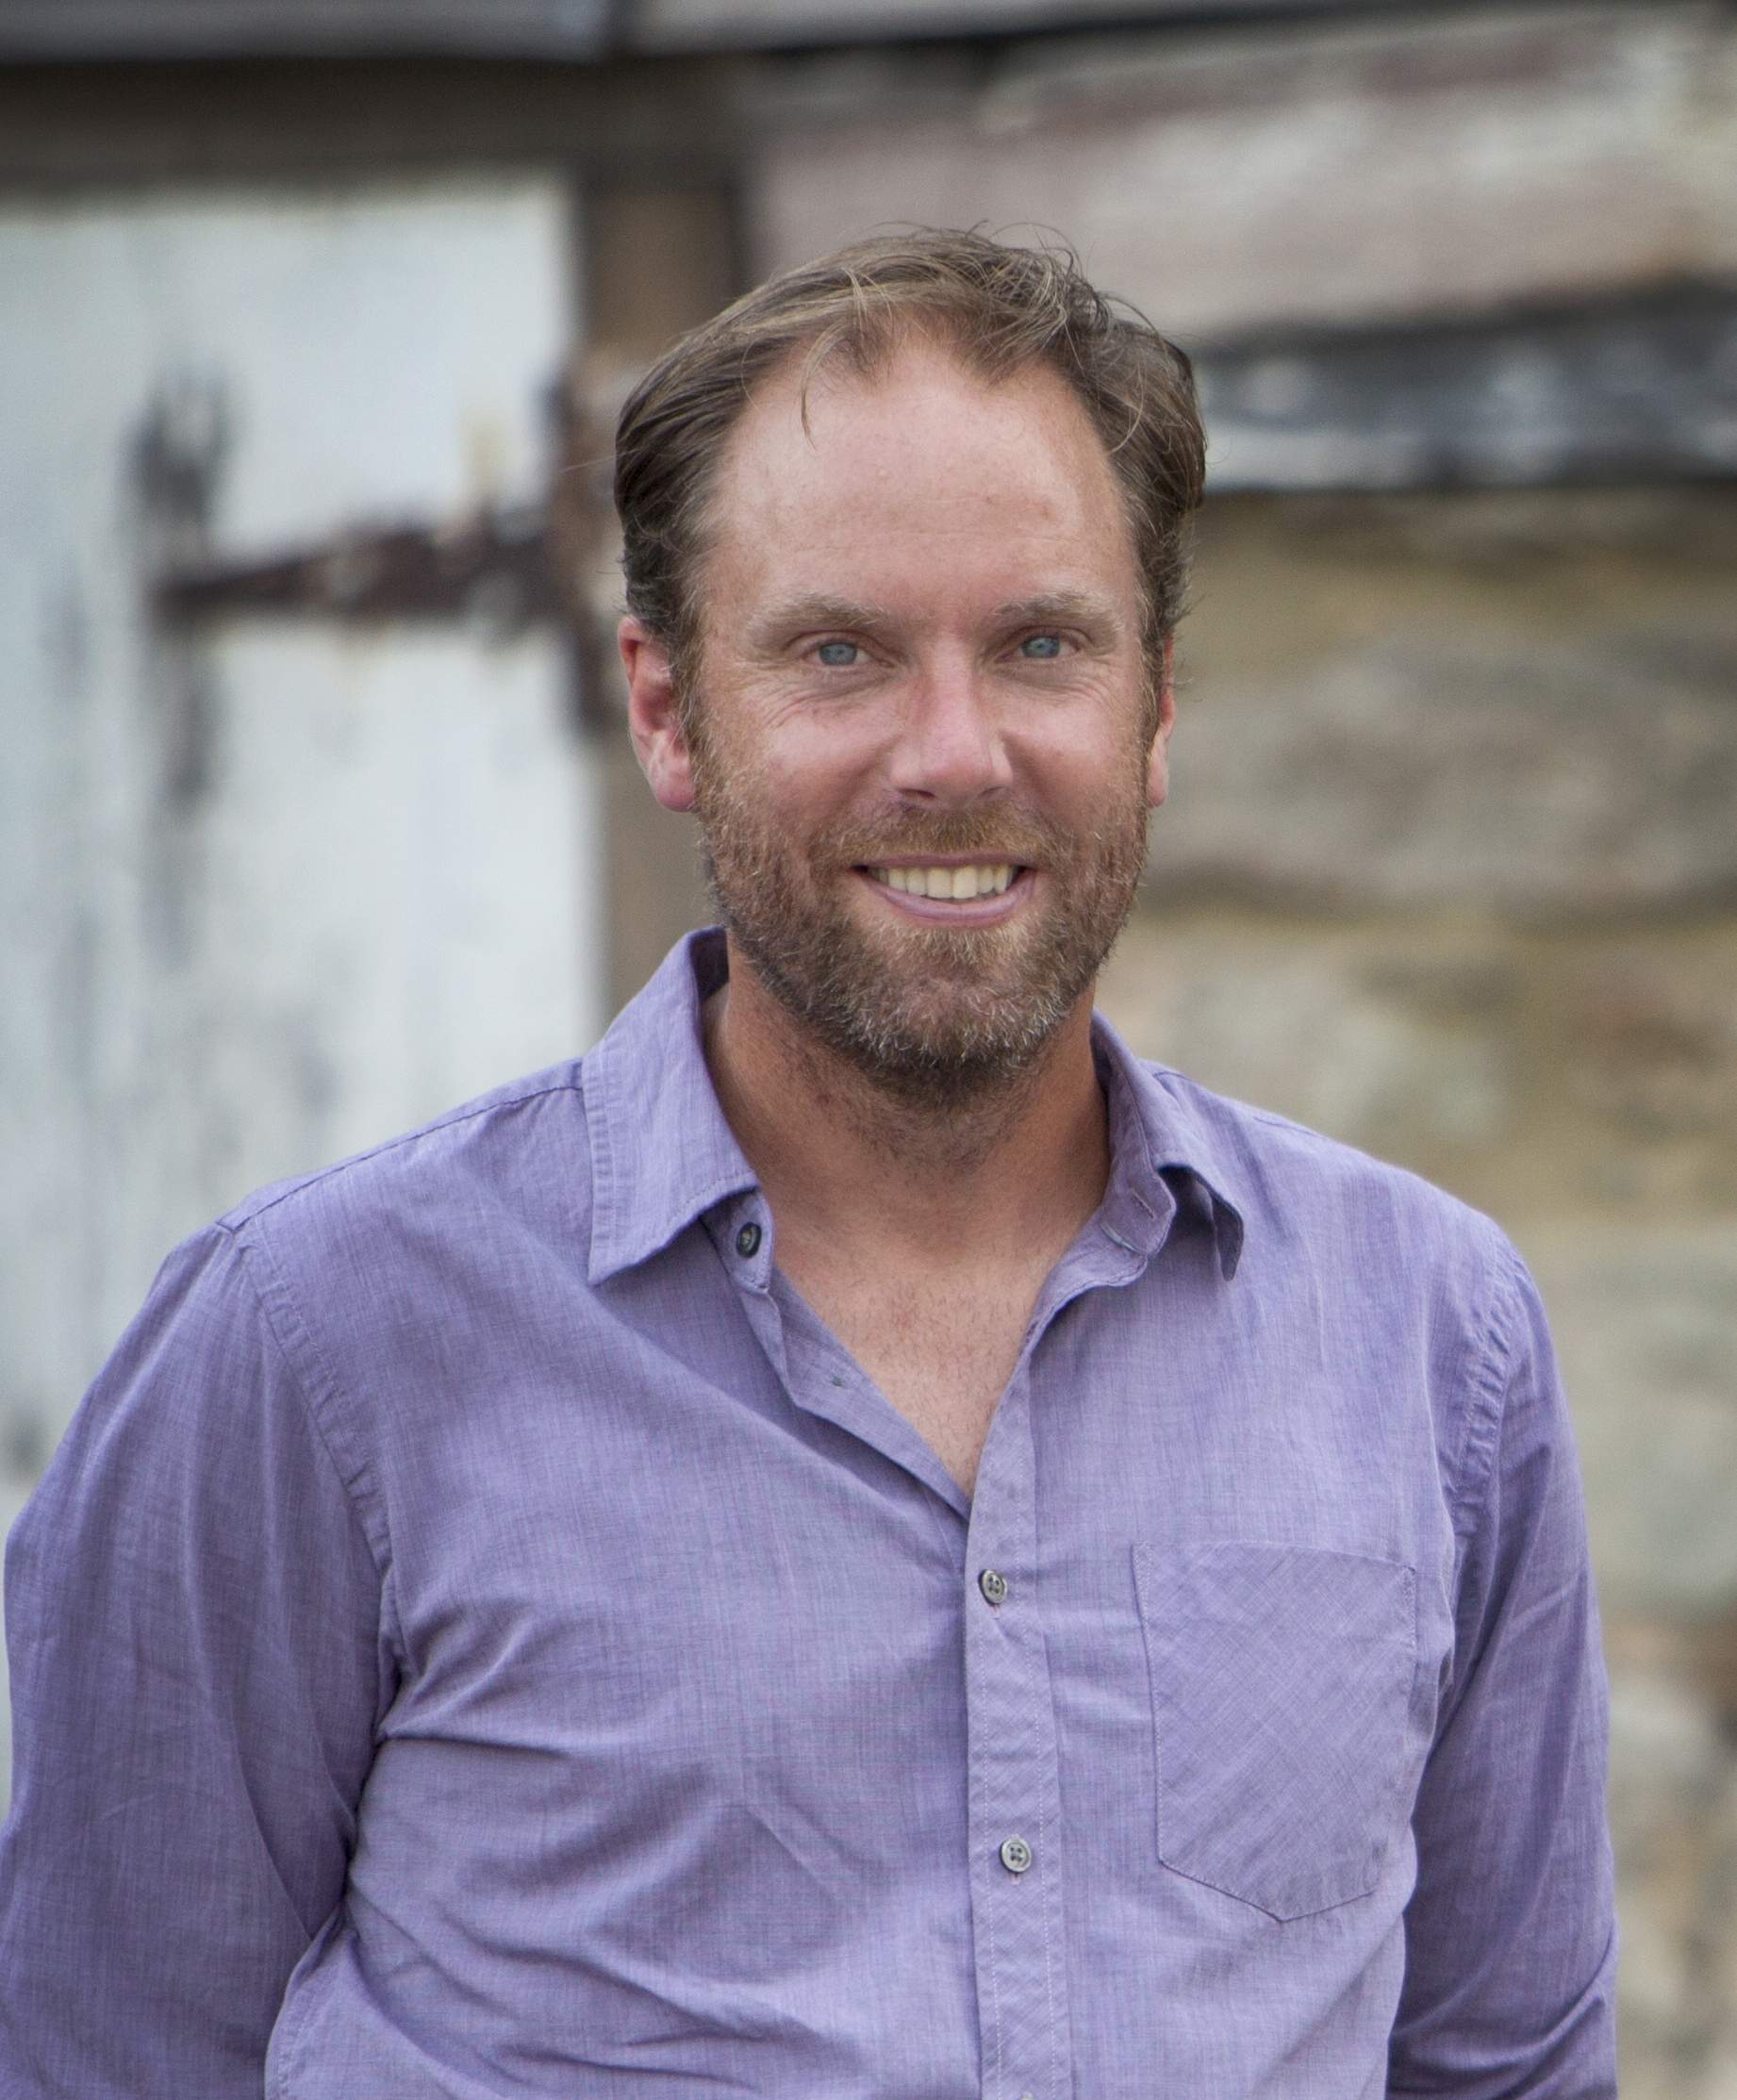 WV author to discuss new sustainable agriculture book at Taylor Books